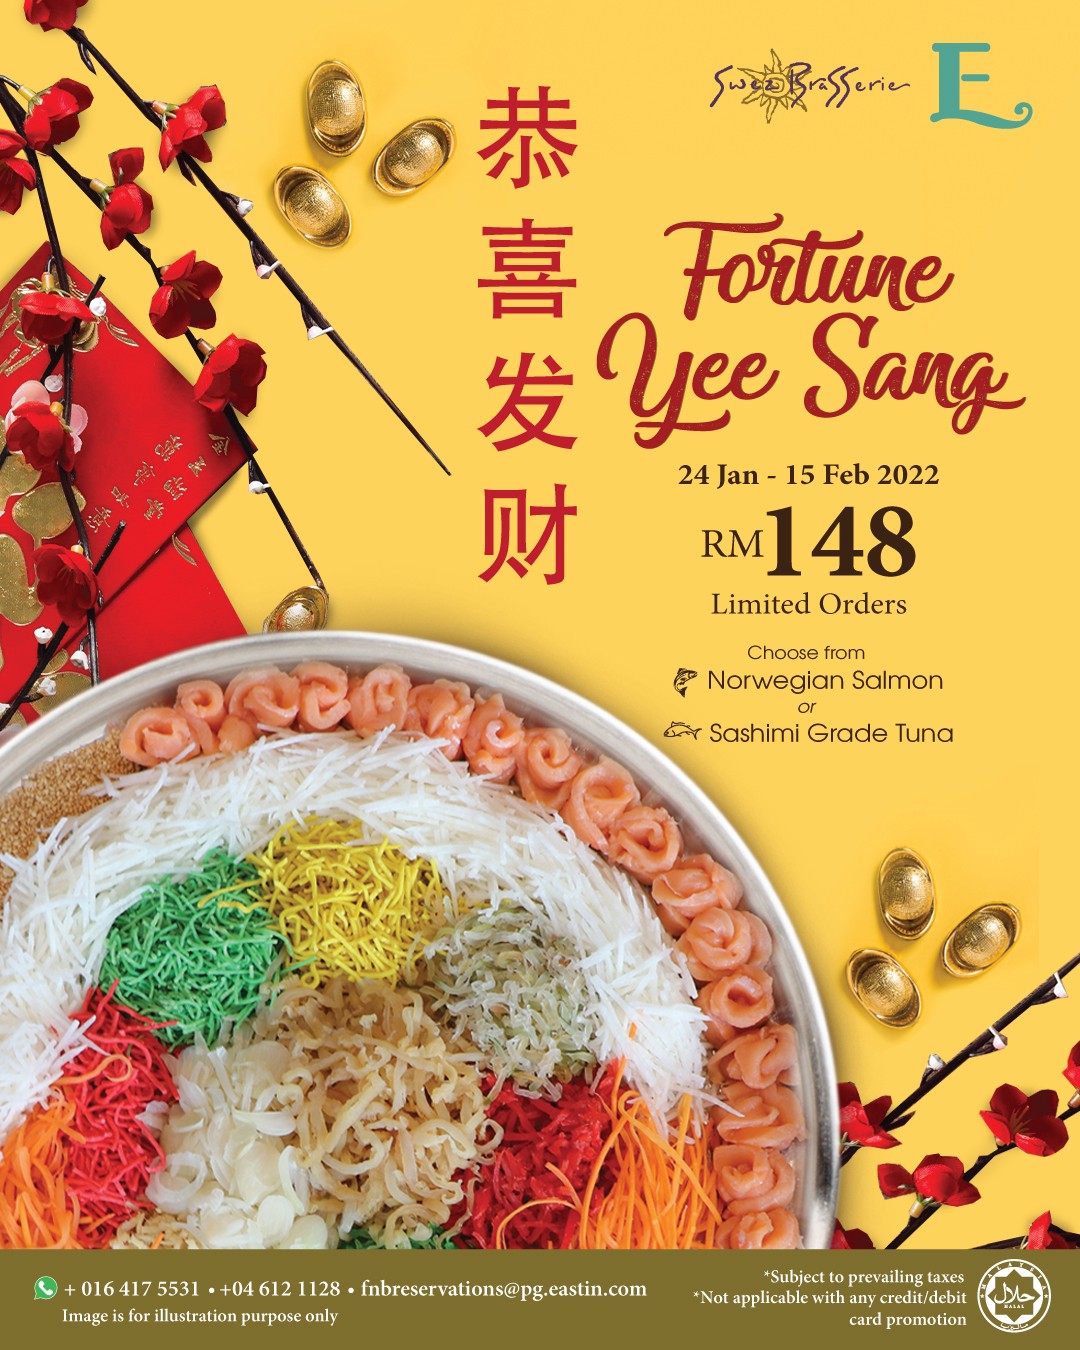 Fortune Yee Sang by Eastin Hotel Penang